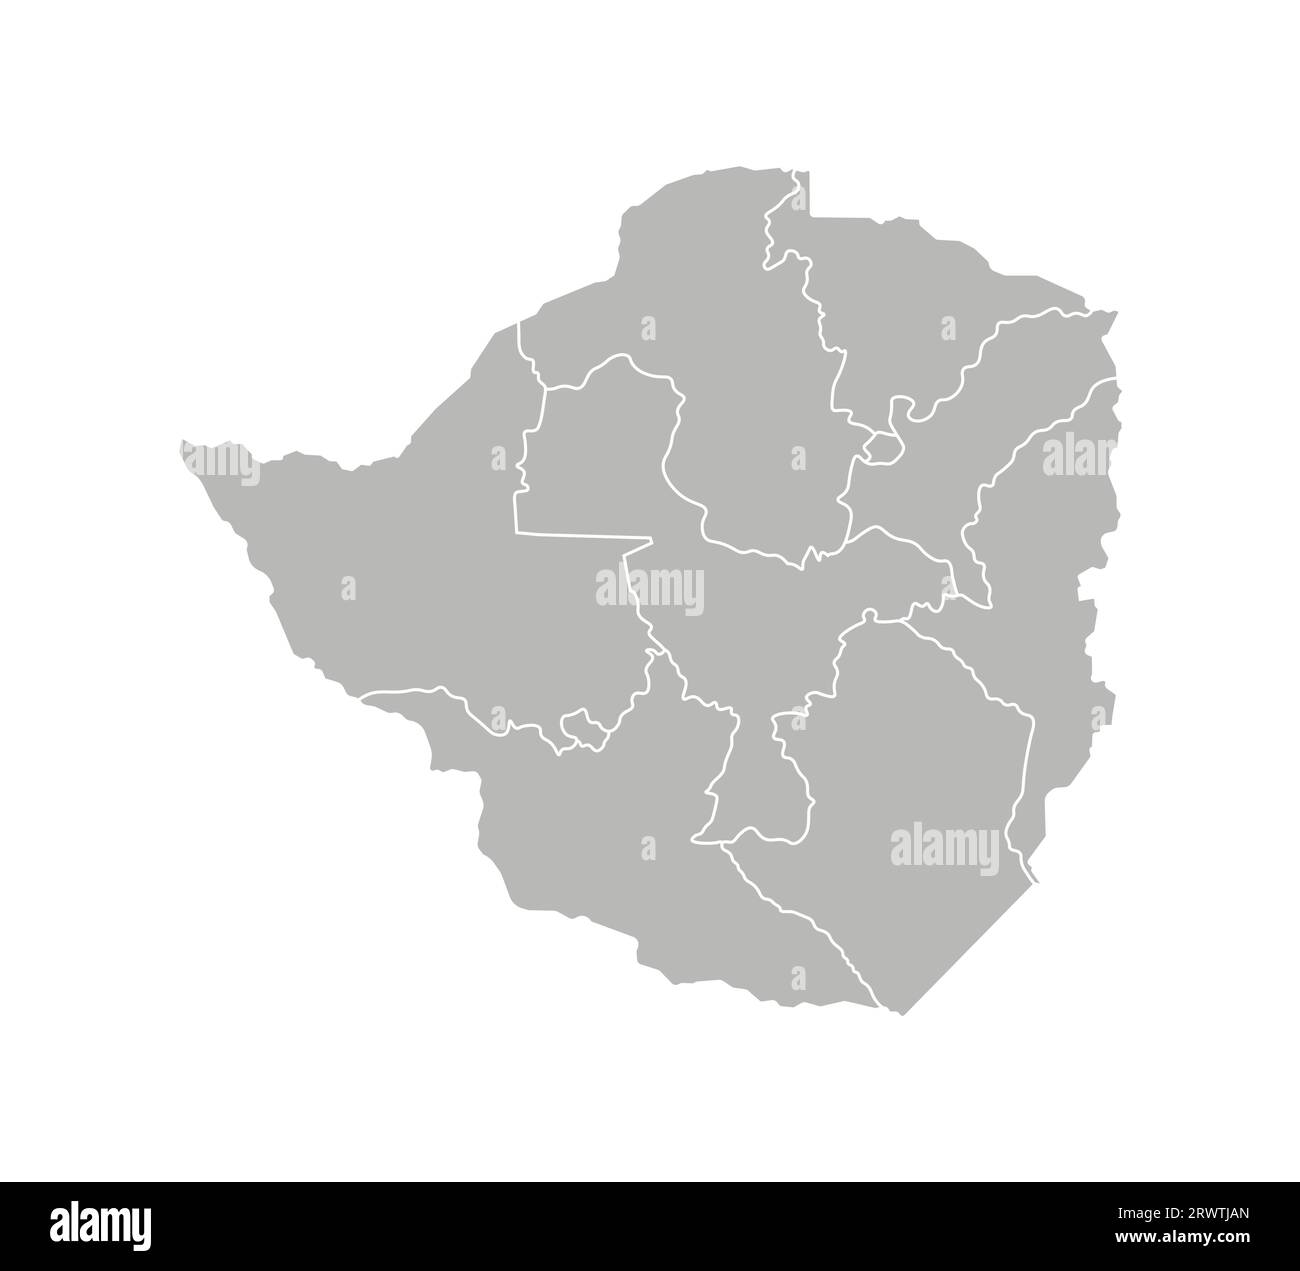 Vector isolated illustration of simplified administrative map of Zimbabwe. Borders of the provinces (regions). Grey silhouettes. White outline. Stock Vector